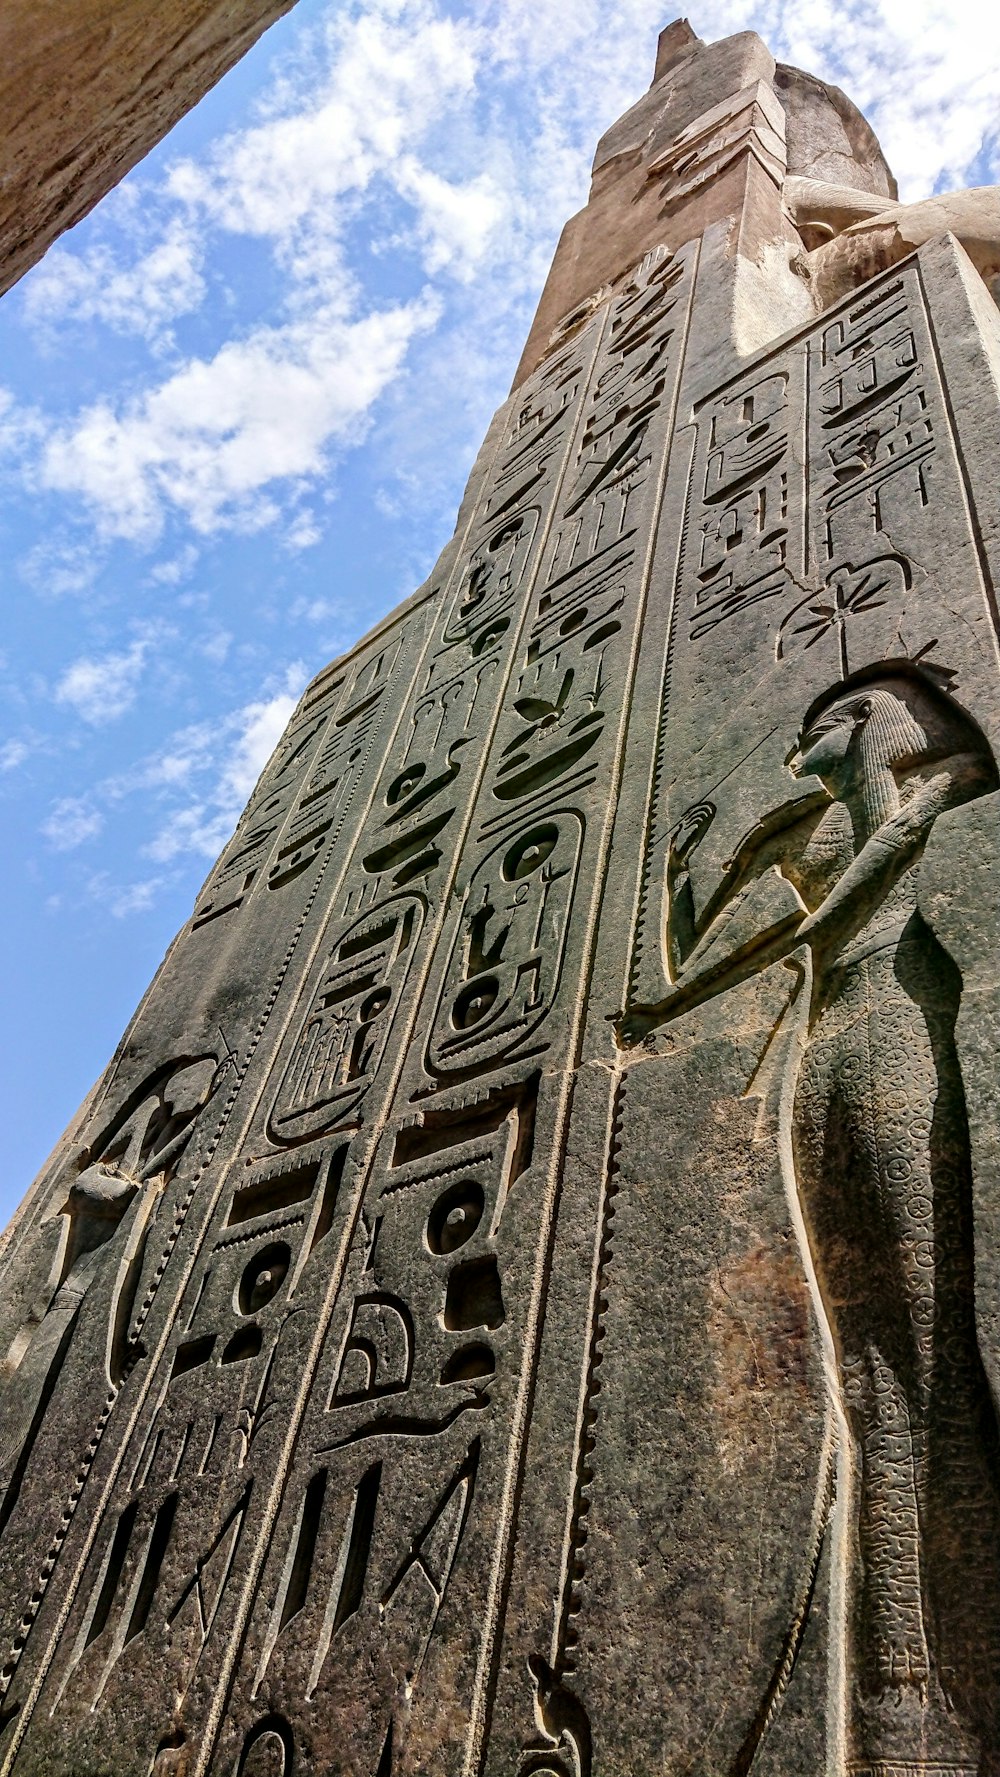 a tall stone tower with egyptian writing on it